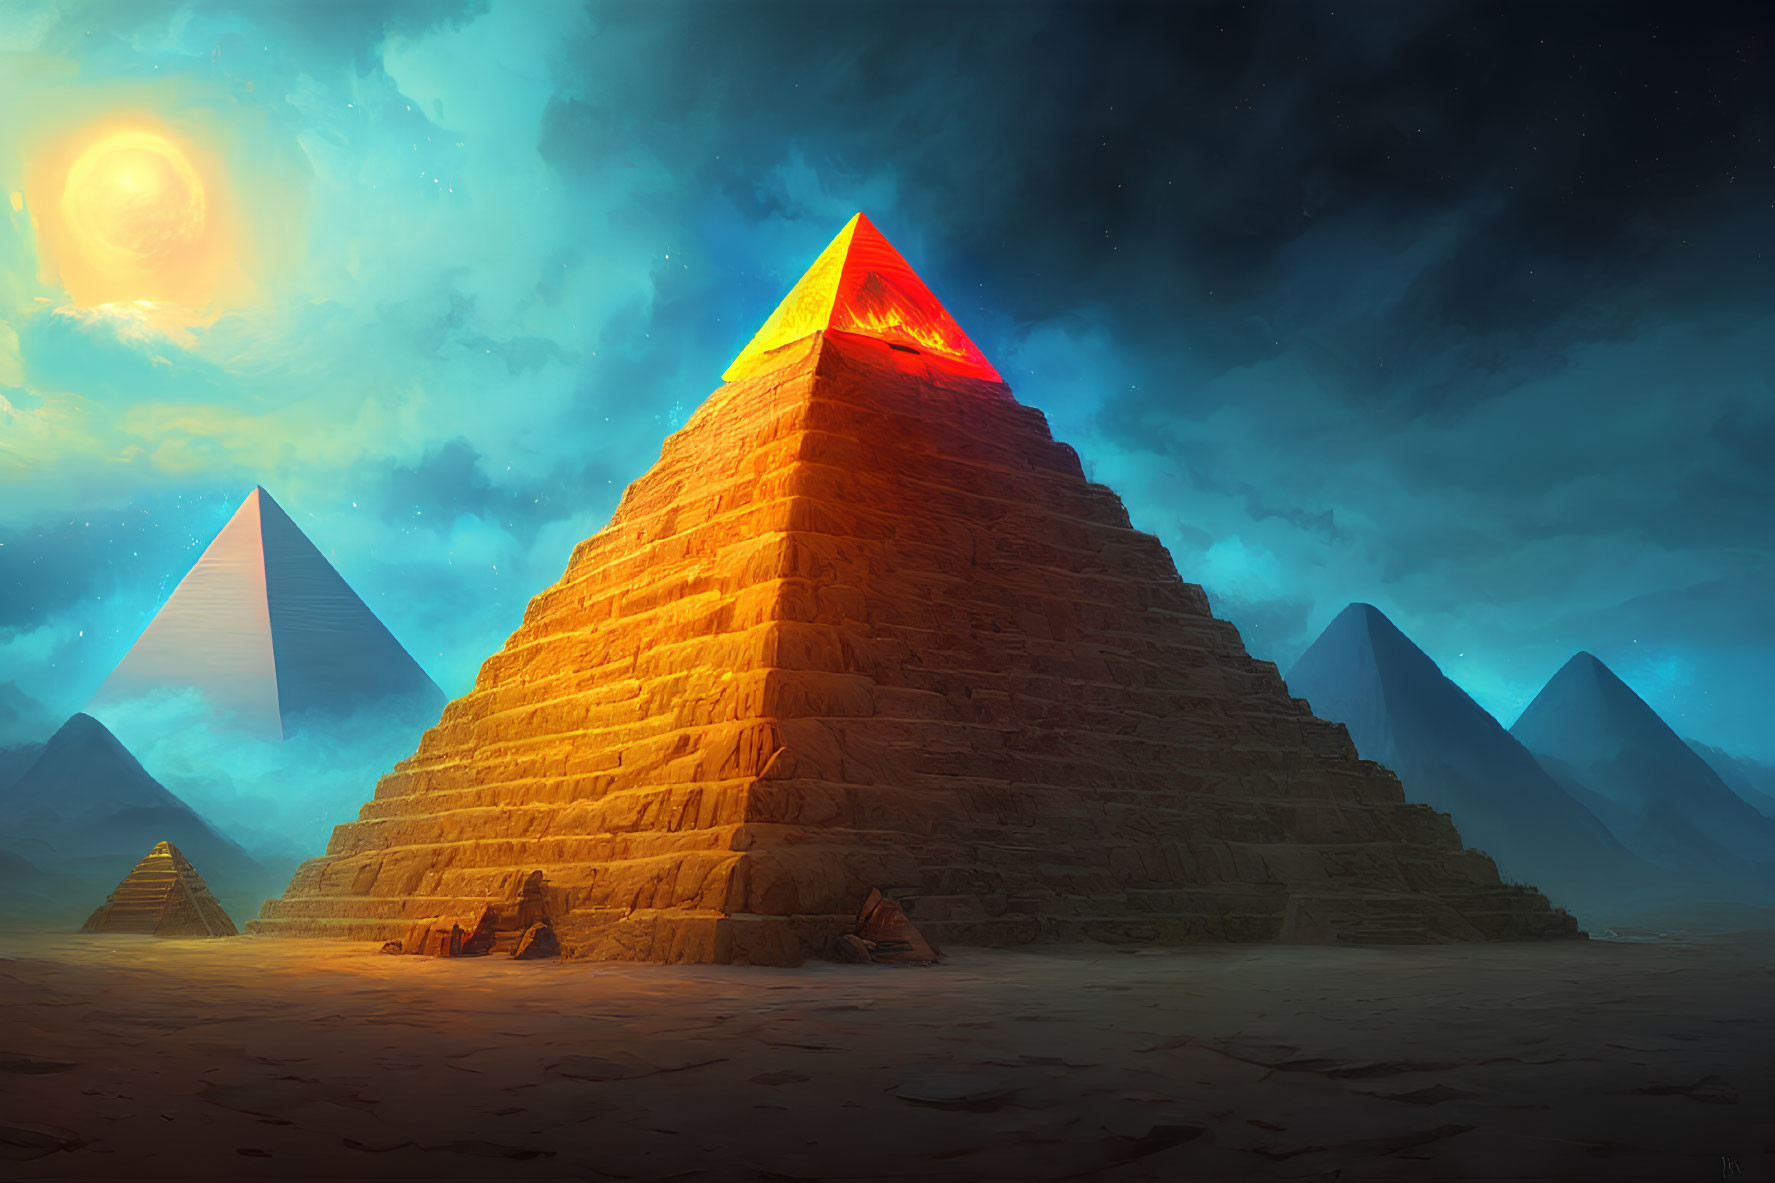 Majestic pyramids under starry sky with glowing red-orange light